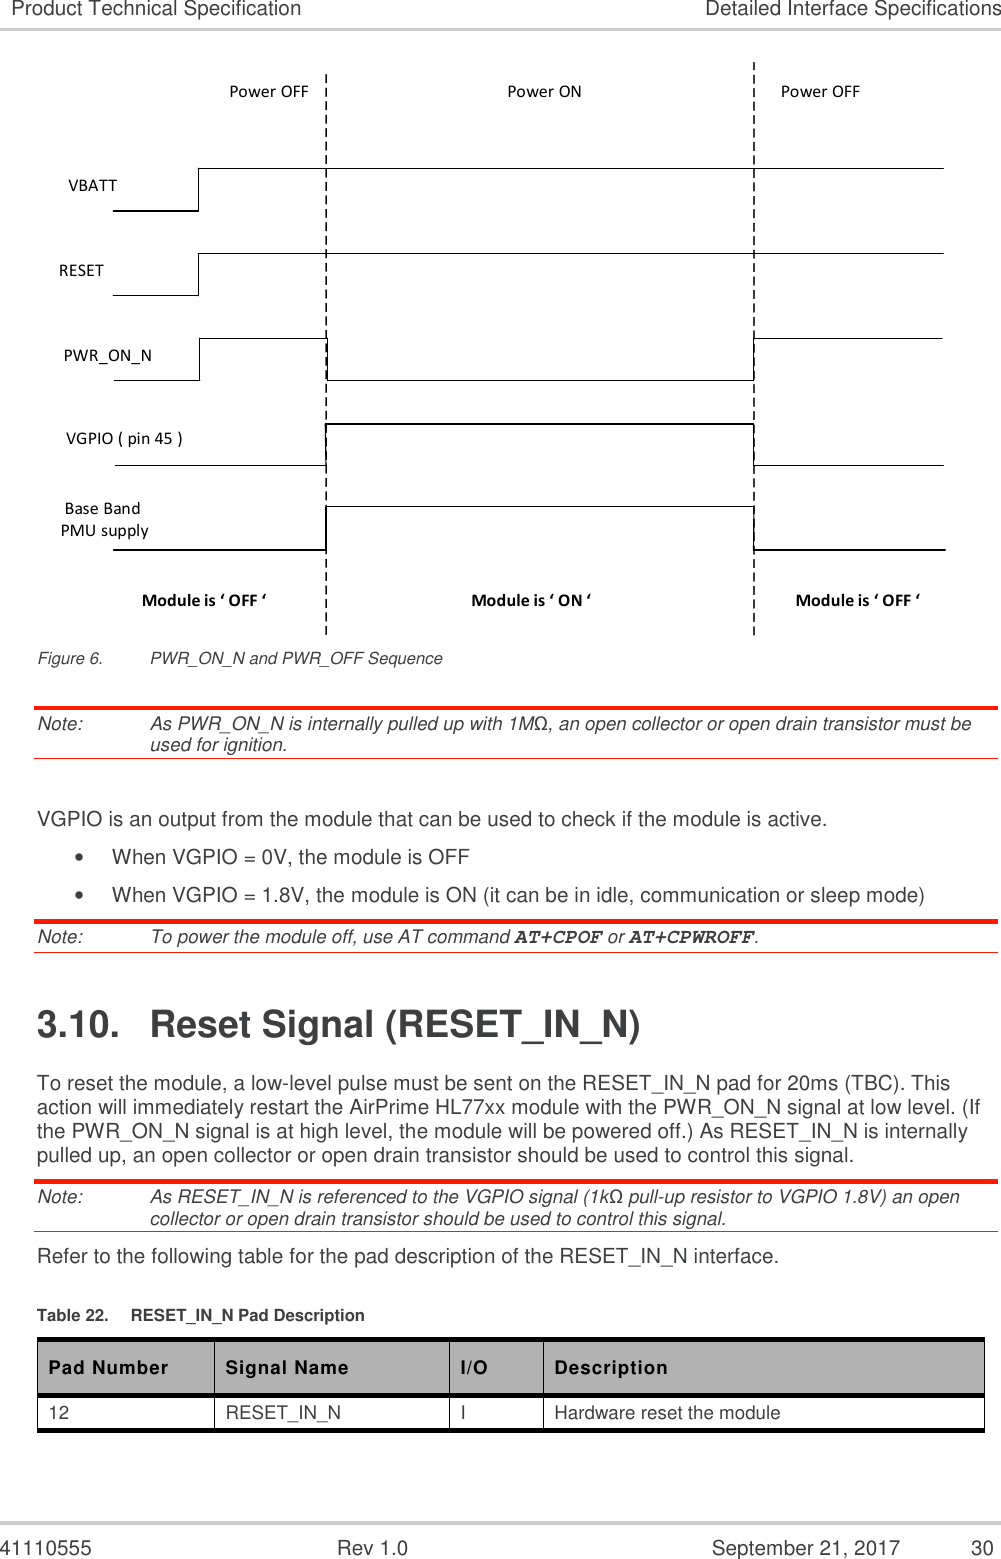   41110555  Rev 1.0  September 21, 2017  30 Product Technical Specification  Detailed Interface Specifications VBATTVGPIO ( pin 45 )PWR_ON_NPower OFF Power ON Power OFFBase Band  PMU supplyModule is ‘ OFF ‘ Module is ‘ OFF ‘Module is ‘ ON ‘RESET Figure 6.  PWR_ON_N and PWR_OFF Sequence Note:   As PWR_ON_N is internally pulled up with 1MΩ, an open collector or open drain transistor must be used for ignition.   VGPIO is an output from the module that can be used to check if the module is active. •  When VGPIO = 0V, the module is OFF •  When VGPIO = 1.8V, the module is ON (it can be in idle, communication or sleep mode) Note:   To power the module off, use AT command AT+CPOF or AT+CPWROFF. 3.10.  Reset Signal (RESET_IN_N) To reset the module, a low-level pulse must be sent on the RESET_IN_N pad for 20ms (TBC). This action will immediately restart the AirPrime HL77xx module with the PWR_ON_N signal at low level. (If the PWR_ON_N signal is at high level, the module will be powered off.) As RESET_IN_N is internally pulled up, an open collector or open drain transistor should be used to control this signal. Note:   As RESET_IN_N is referenced to the VGPIO signal (1kΩ pull-up resistor to VGPIO 1.8V) an open collector or open drain transistor should be used to control this signal. Refer to the following table for the pad description of the RESET_IN_N interface. Table 22.  RESET_IN_N Pad Description Pad Number Signal Name I/O Description 12  RESET_IN_N  I  Hardware reset the module  